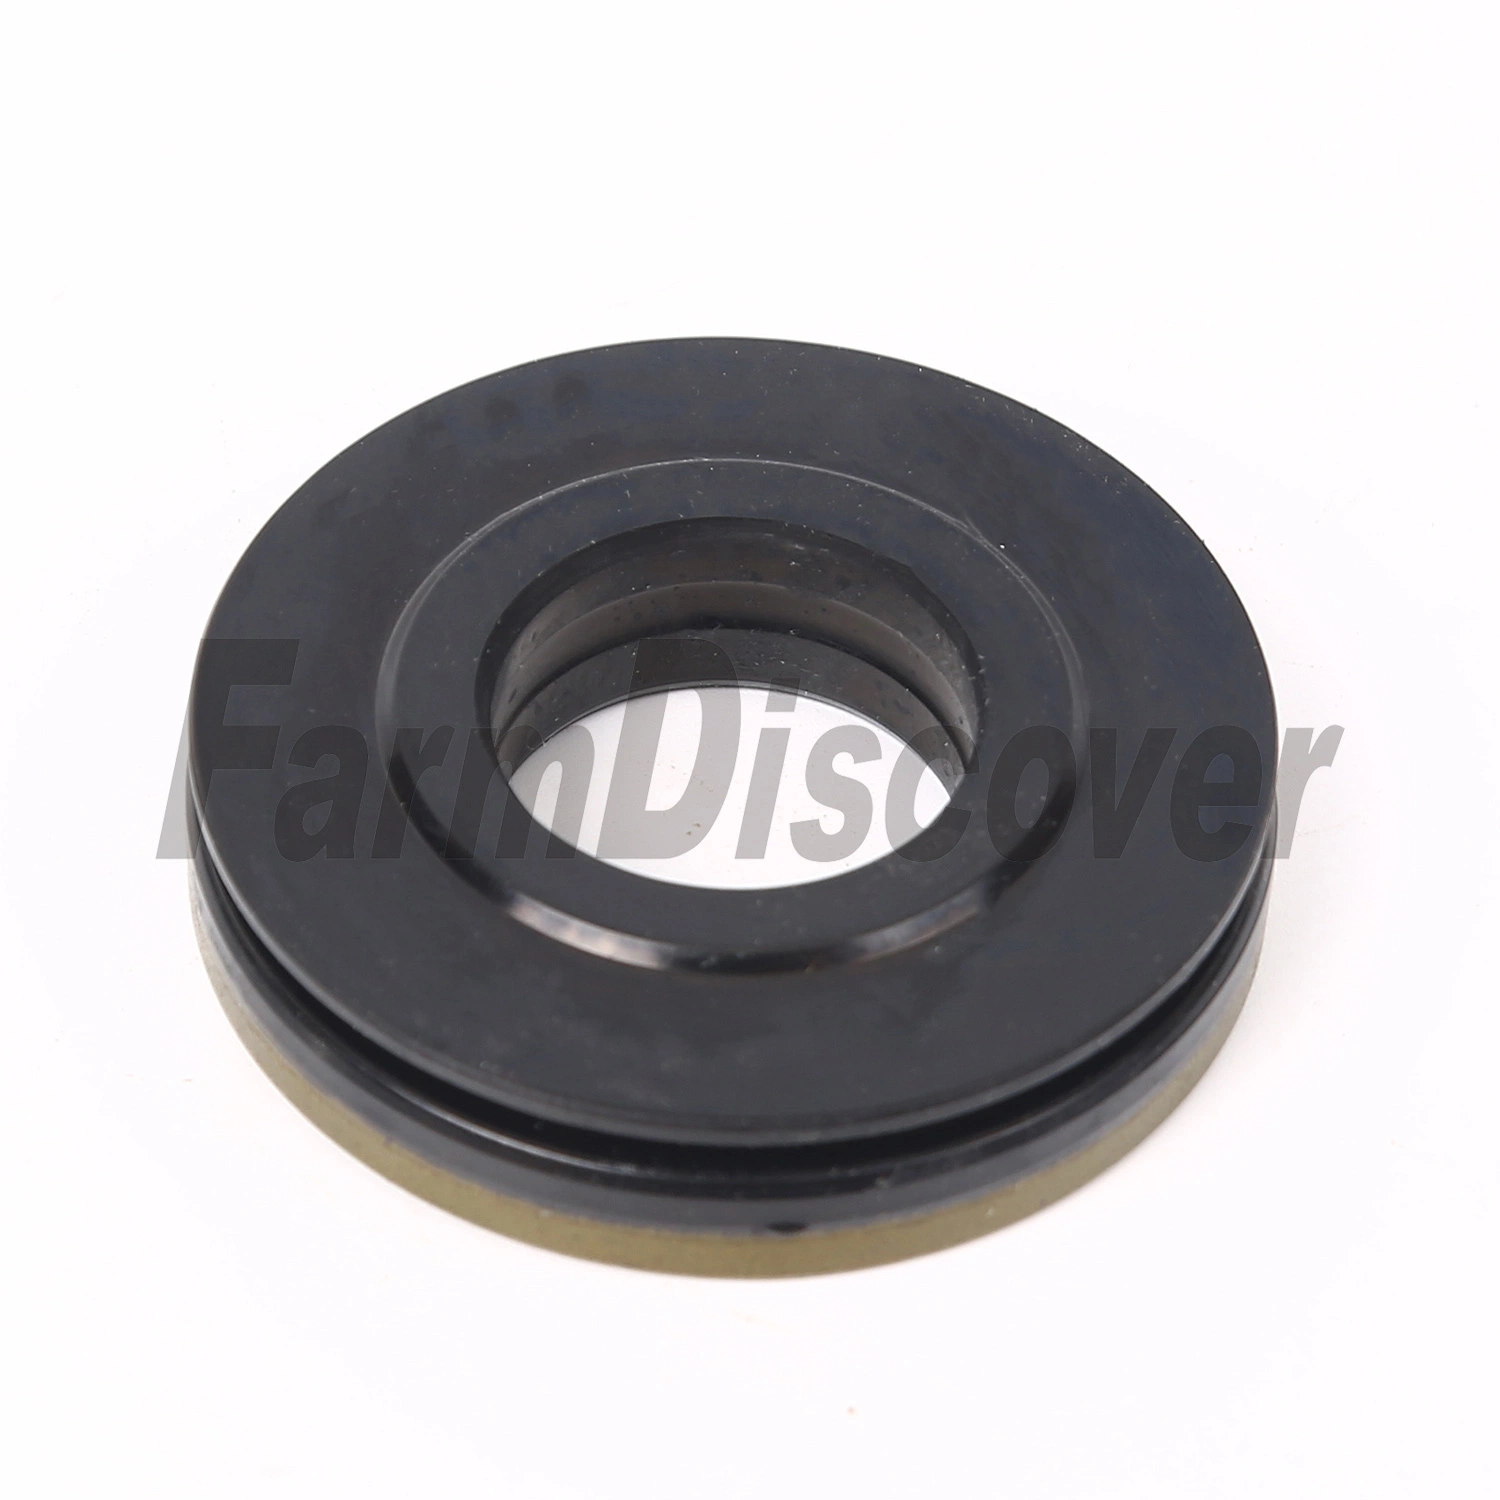 5t070-23210 Oil Seal for Kubota Combine Harvester DC68 and D70